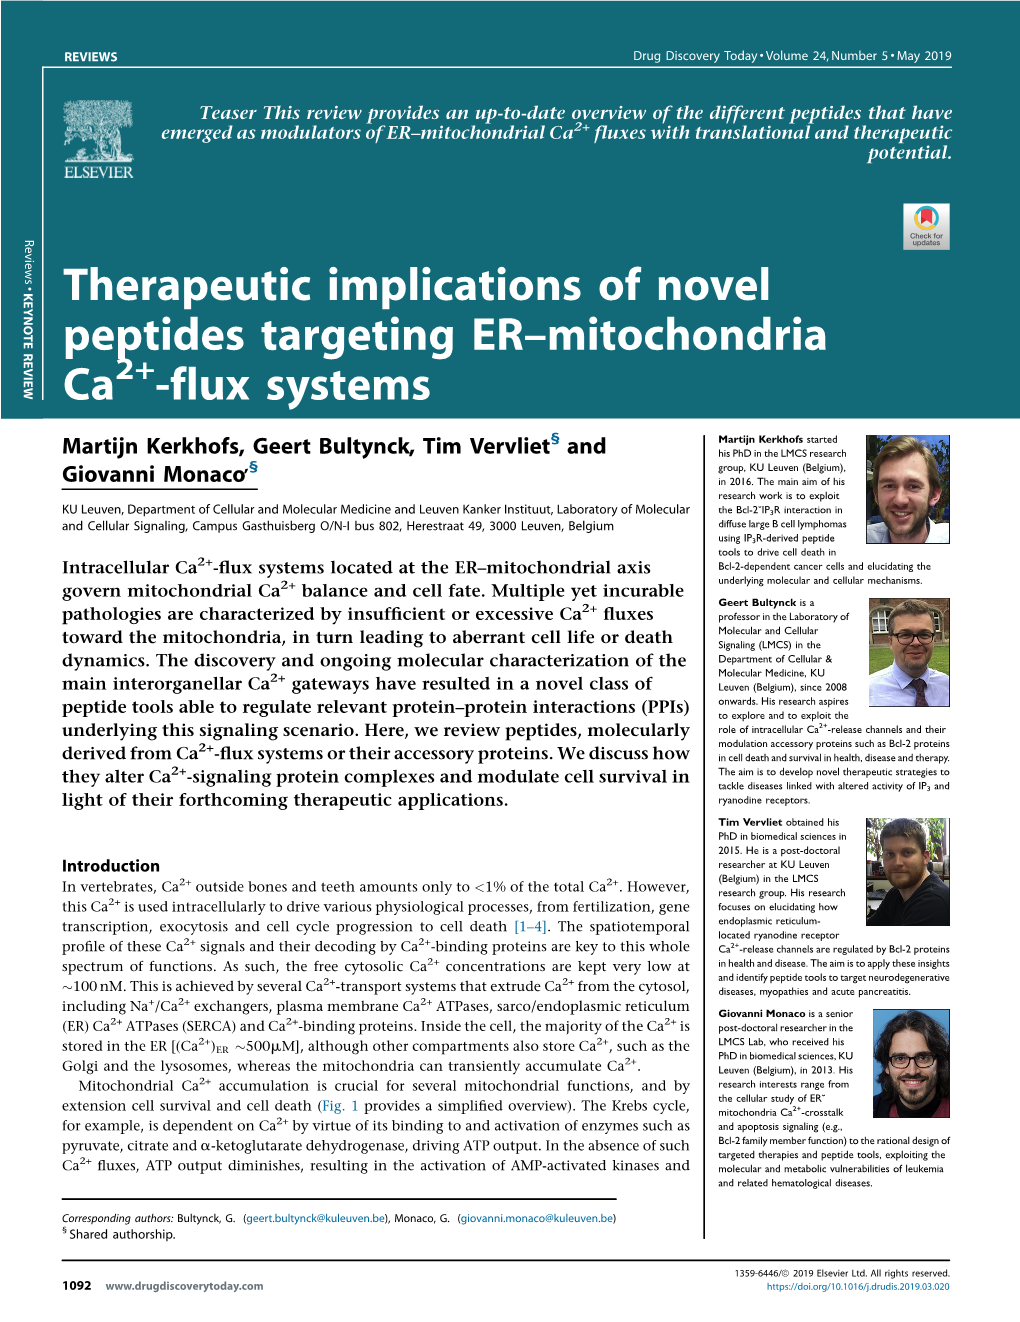 Therapeutic Implications of Novel Peptides Targeting ER